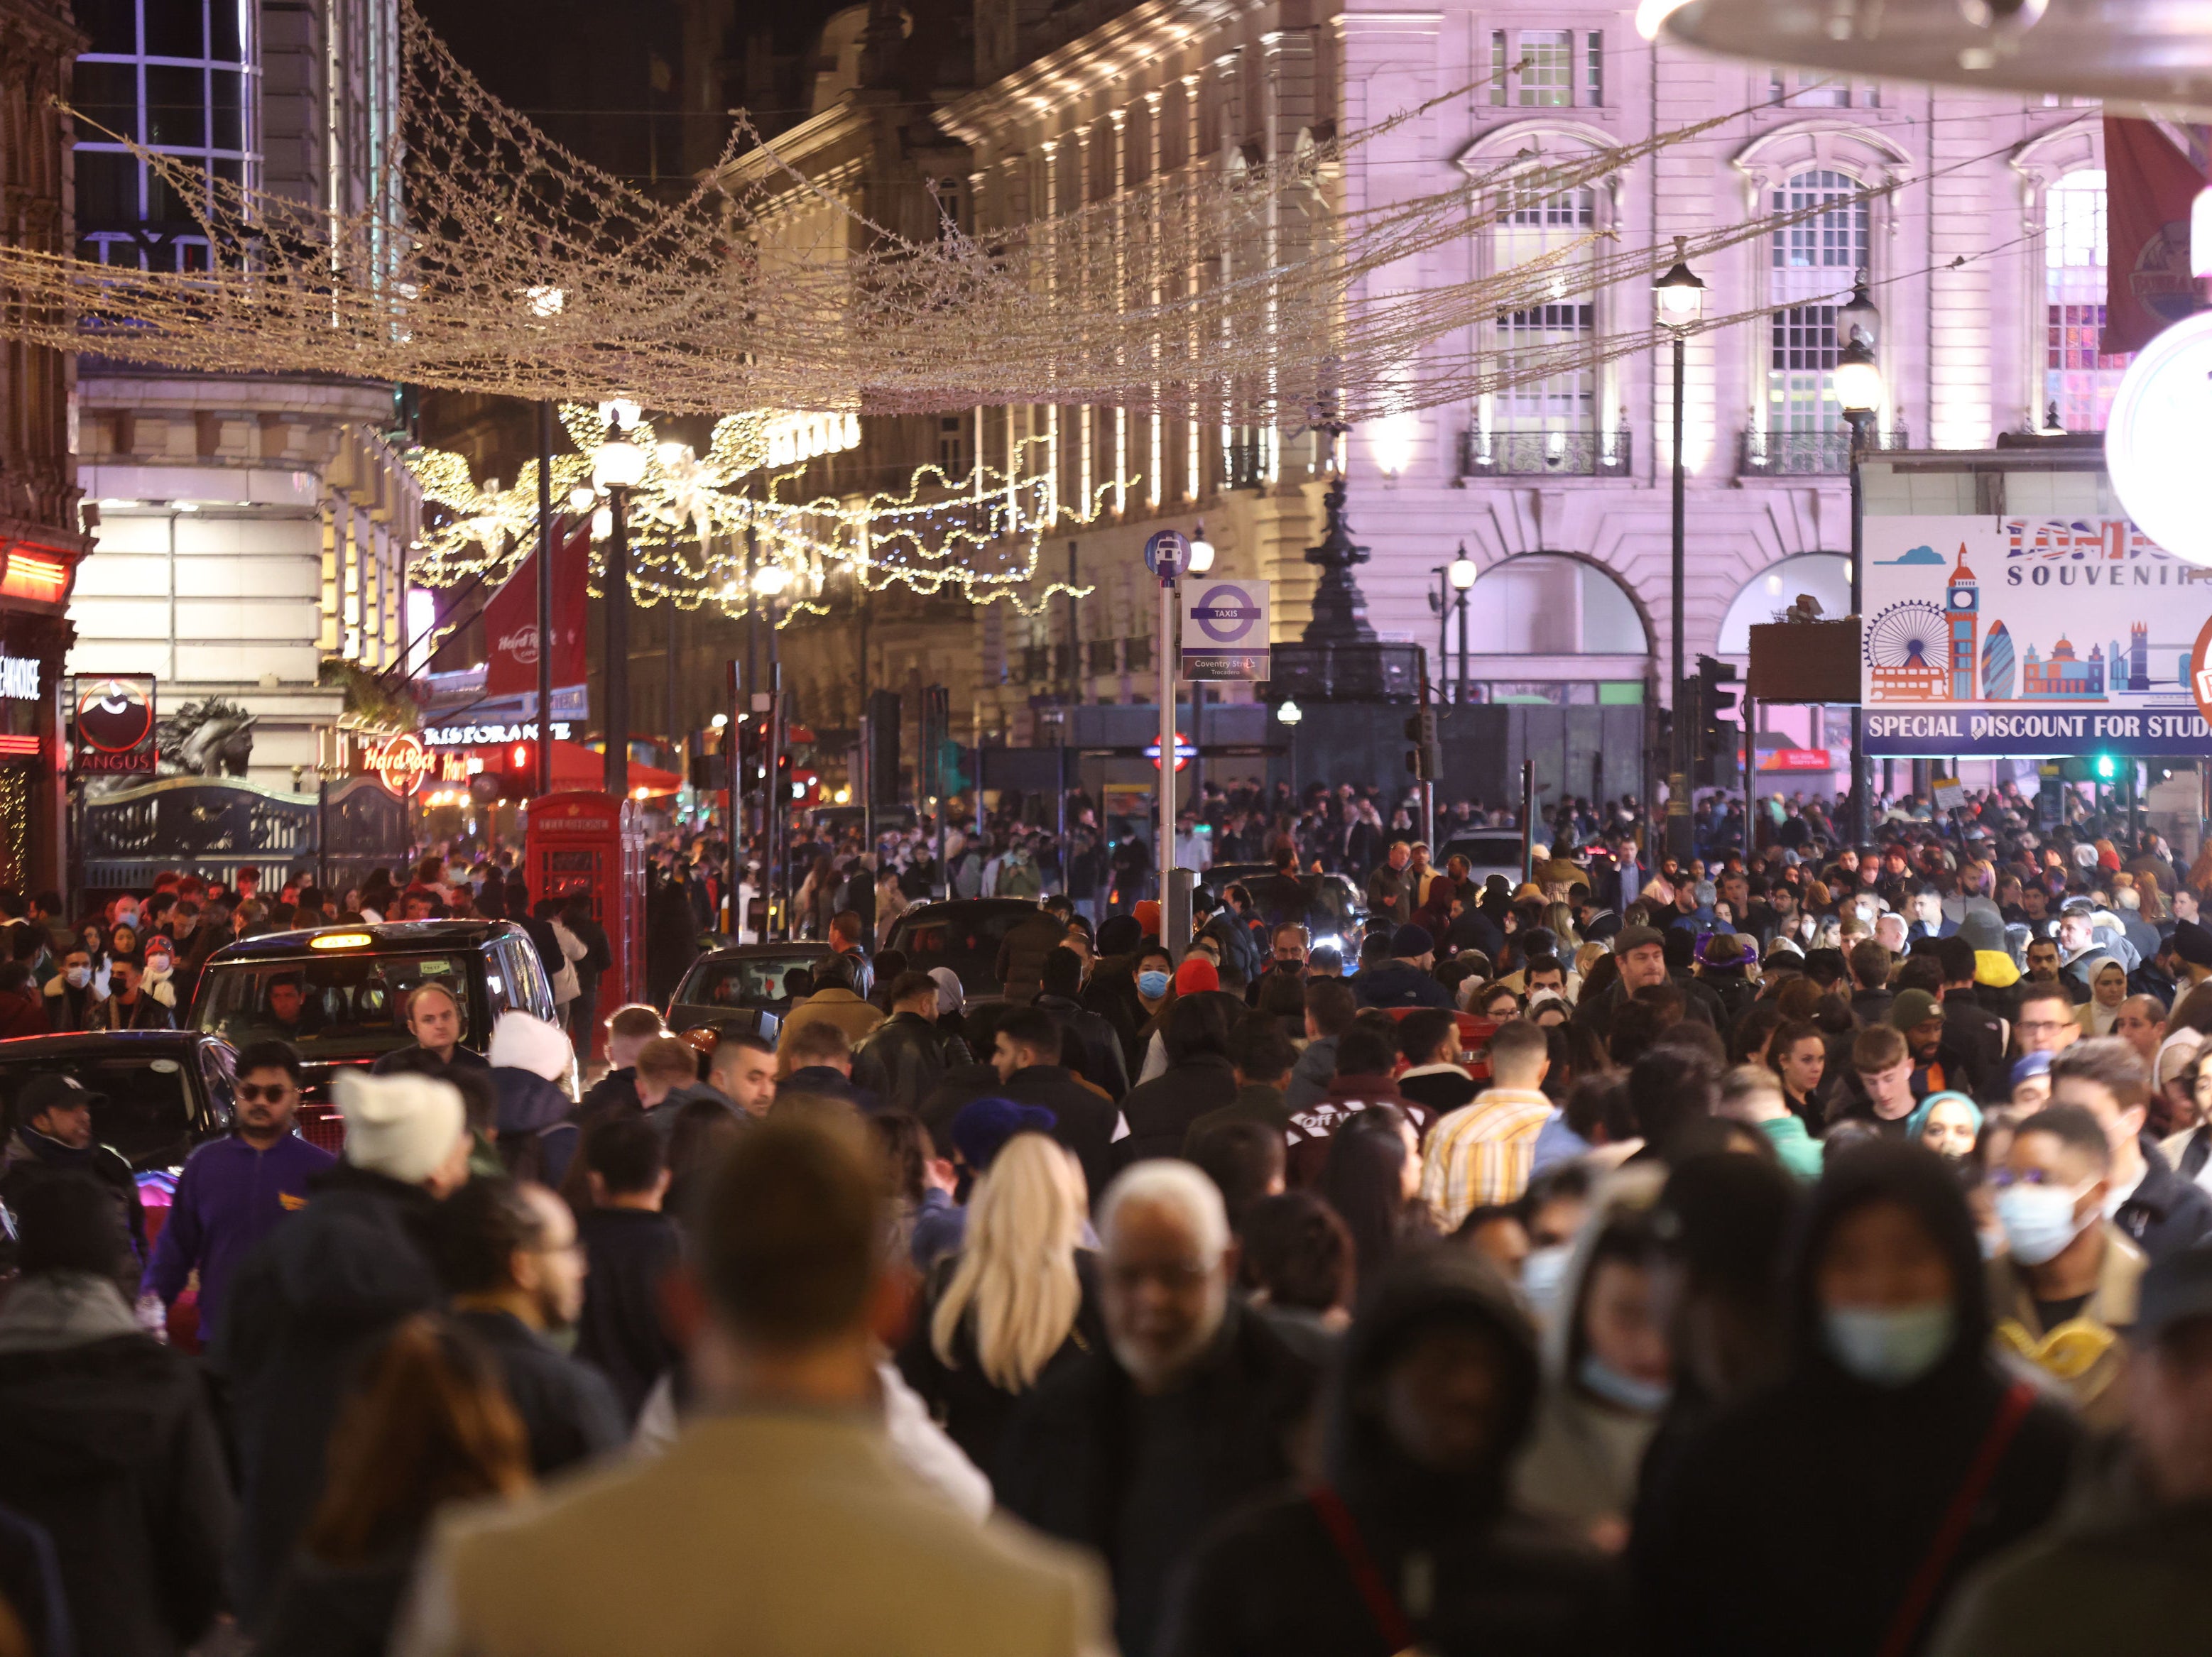 People gather in large numbers in Leicester Square, central London, to celebrate New Year's Eve